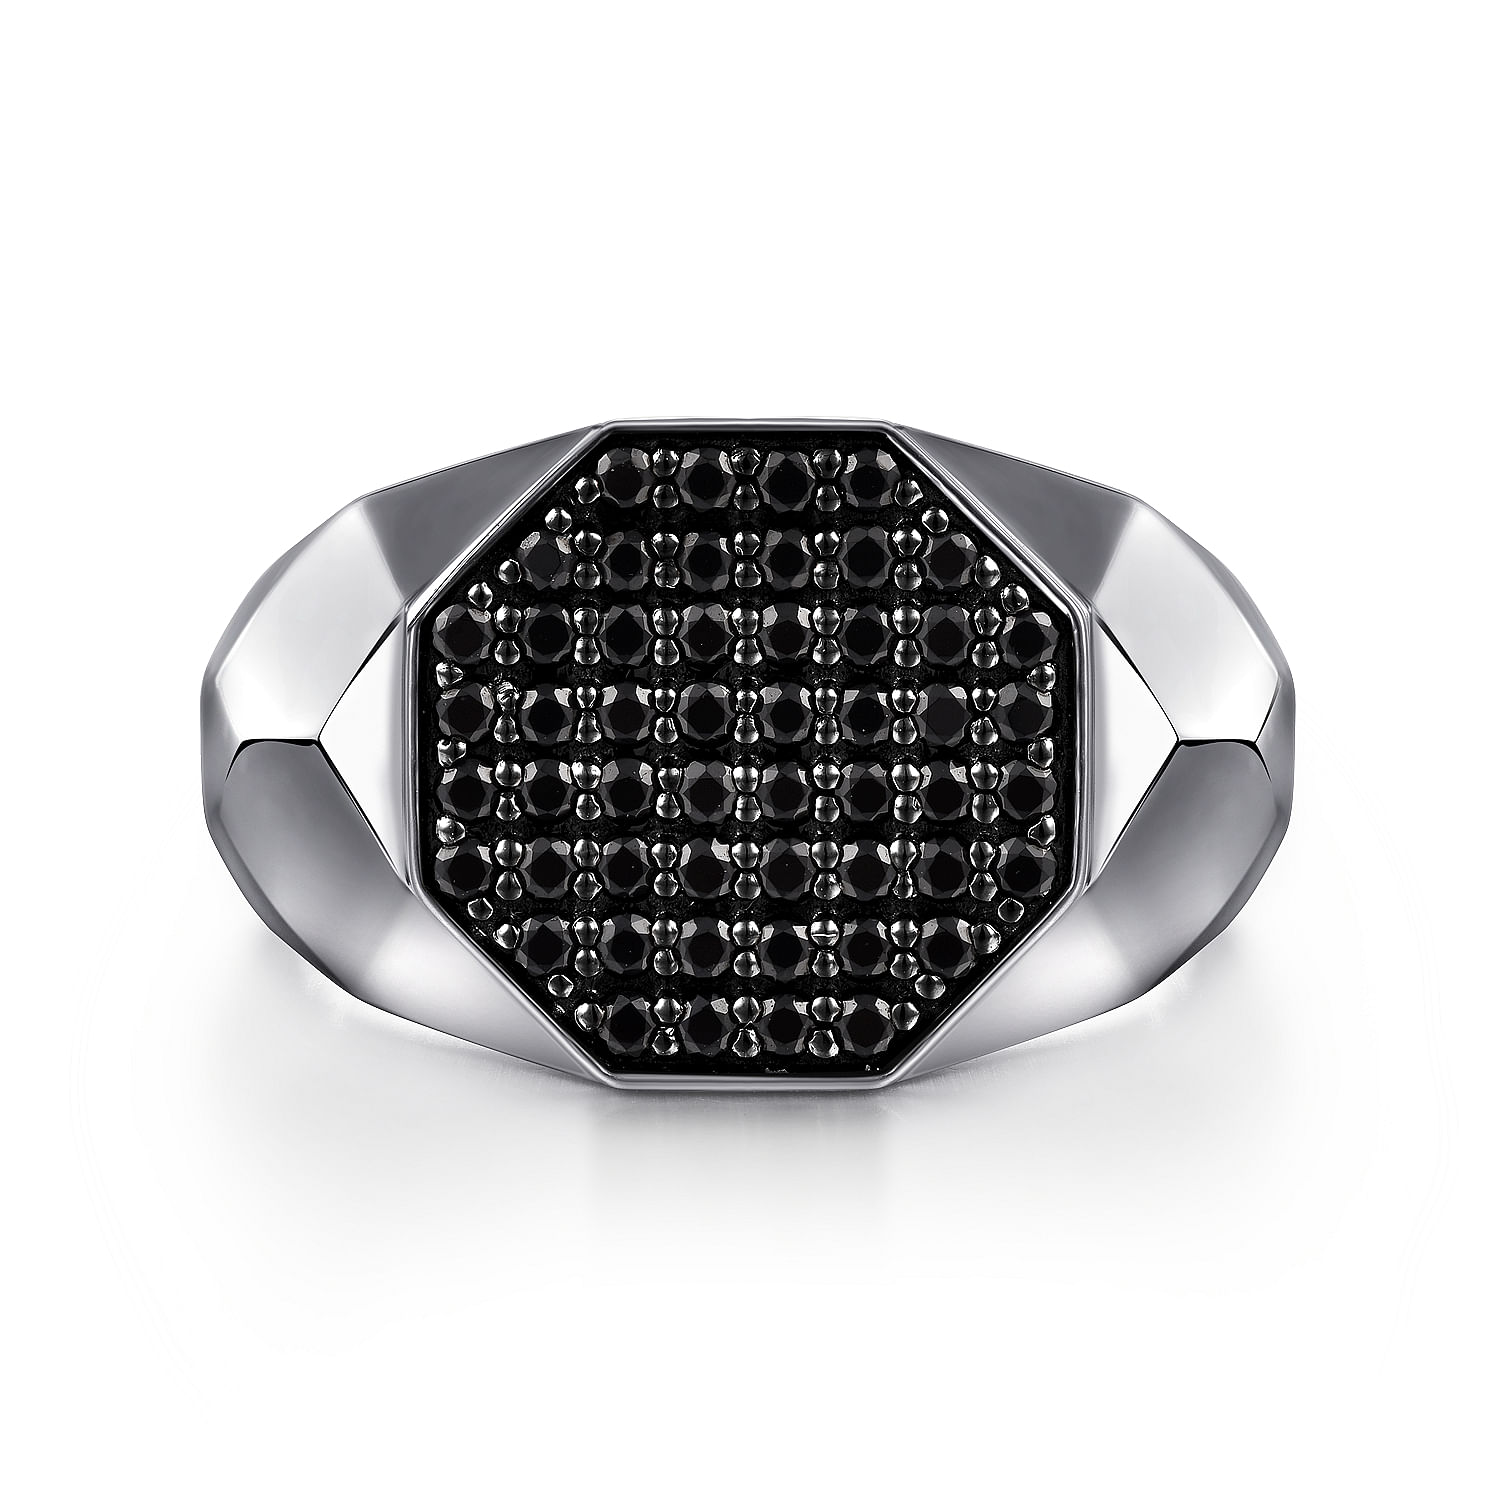 Wide 925 Sterling Silver Faceted Signet Ring with Black Spinel Pavé in High Polished Finish